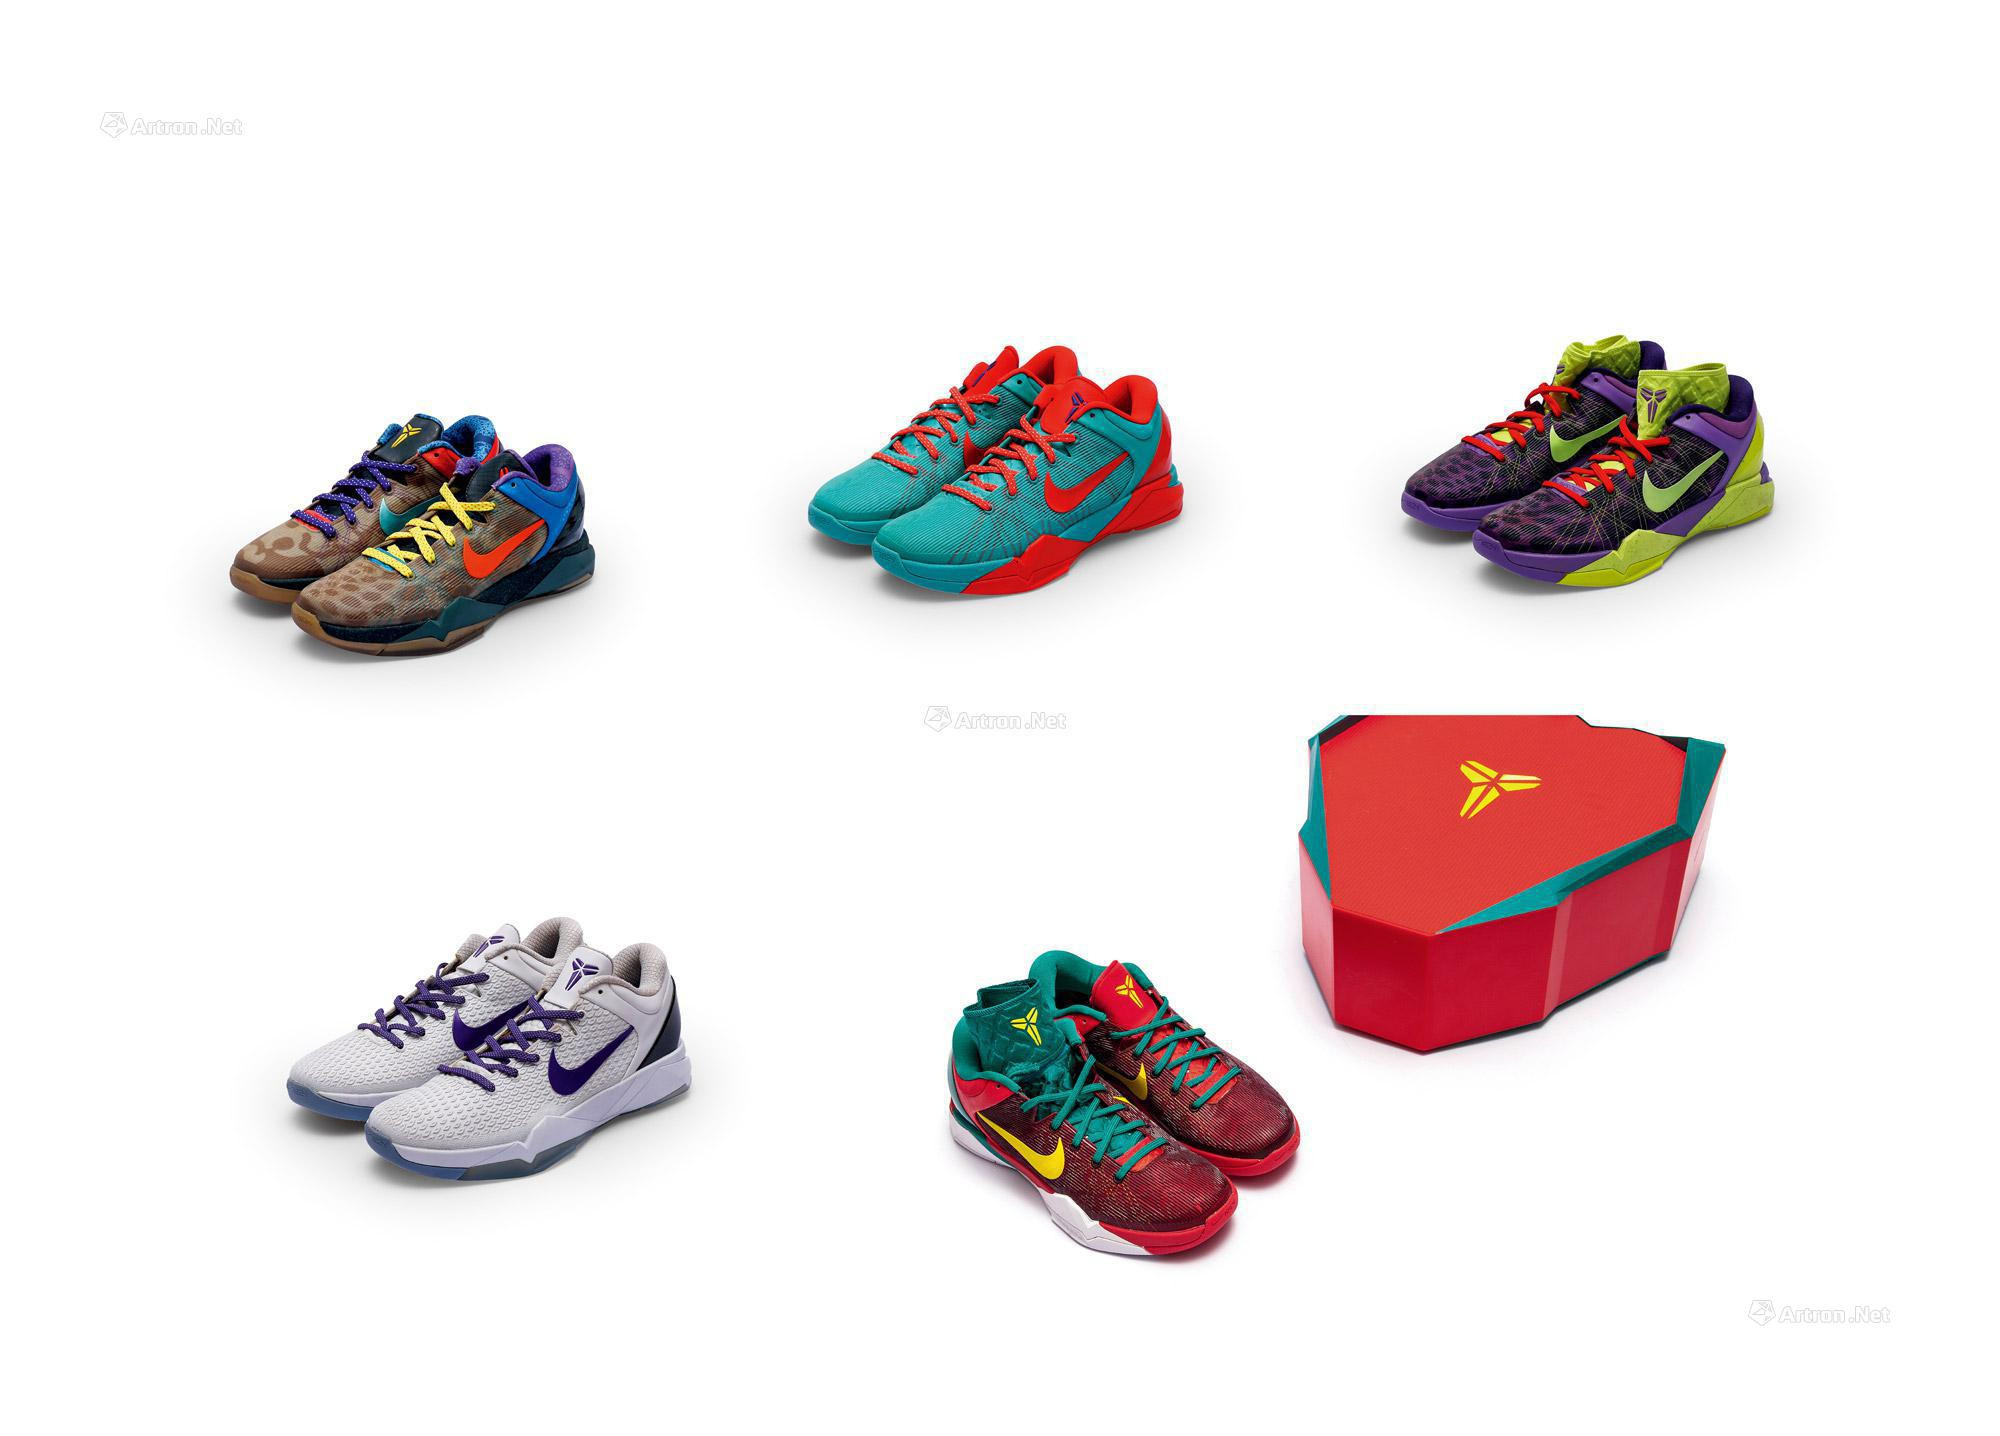 Nike Zoom Kobe VII Signature Sneaker Collection  5 Pairs of Exclusive Sneakers